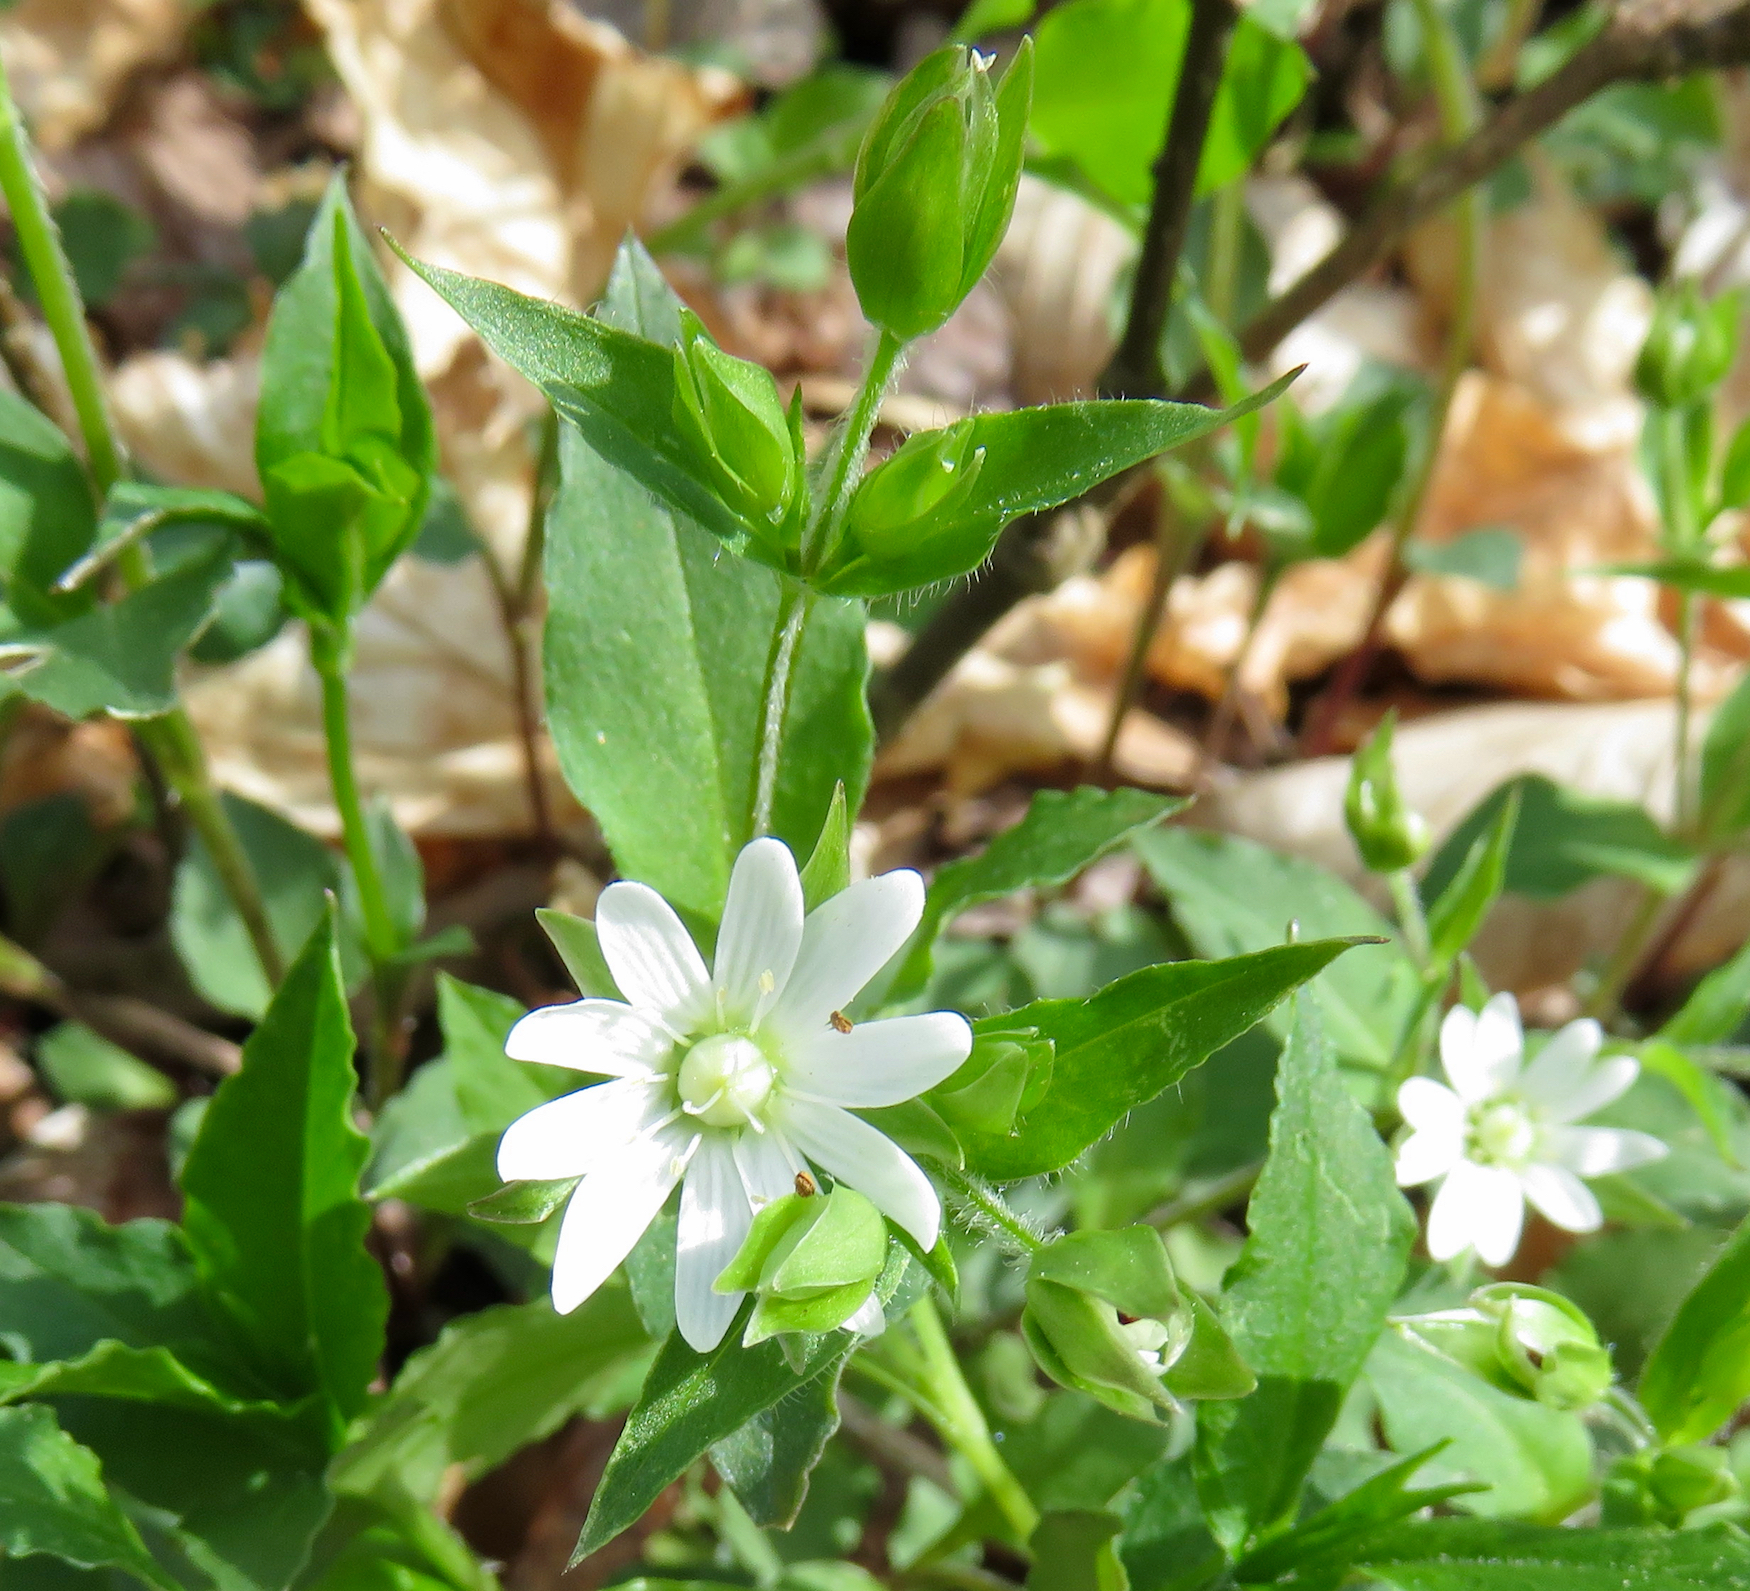 The Scientific Name is Stellaria corei. You will likely hear them called Tennessee Starwort. This picture shows the Like the more common Star Chickweed (Stellaria pubera), this mountain starwort/chickweed has 5 white petals that are so deeply cleft that it appears to have 10 petals. The mountain species, however, has sepals as long as the petals, unlike Star Chickweed, whose sepals are shorter than the petals.  of Stellaria corei